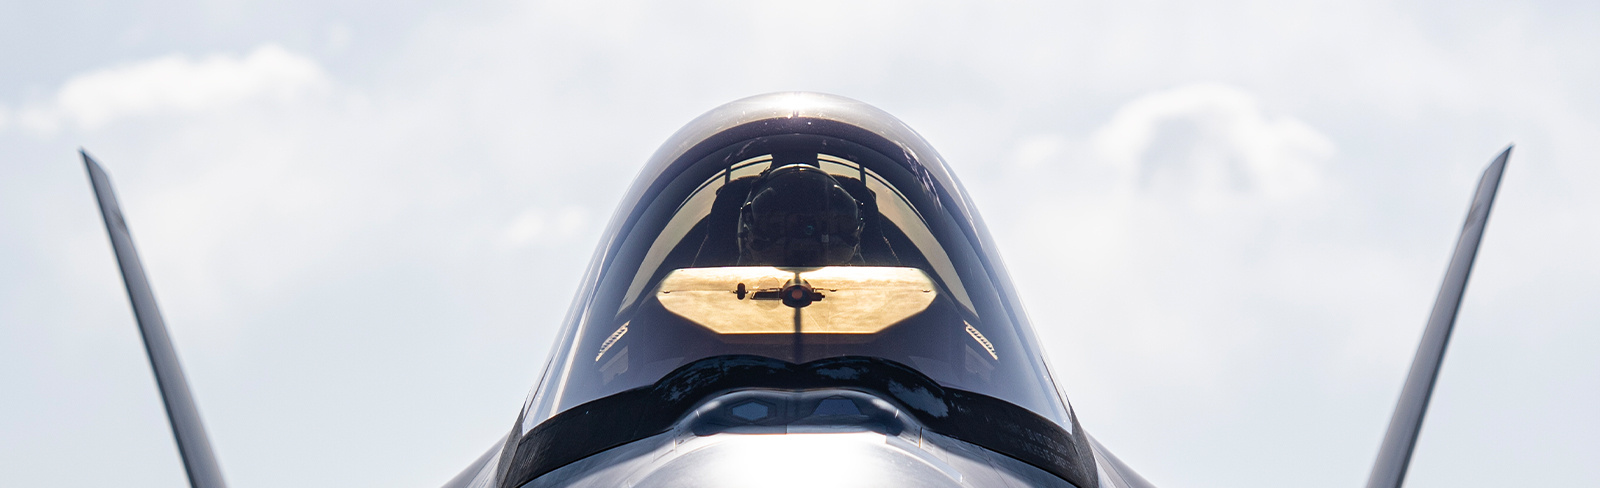 Head-on view of F-35 aircraft ready for flight